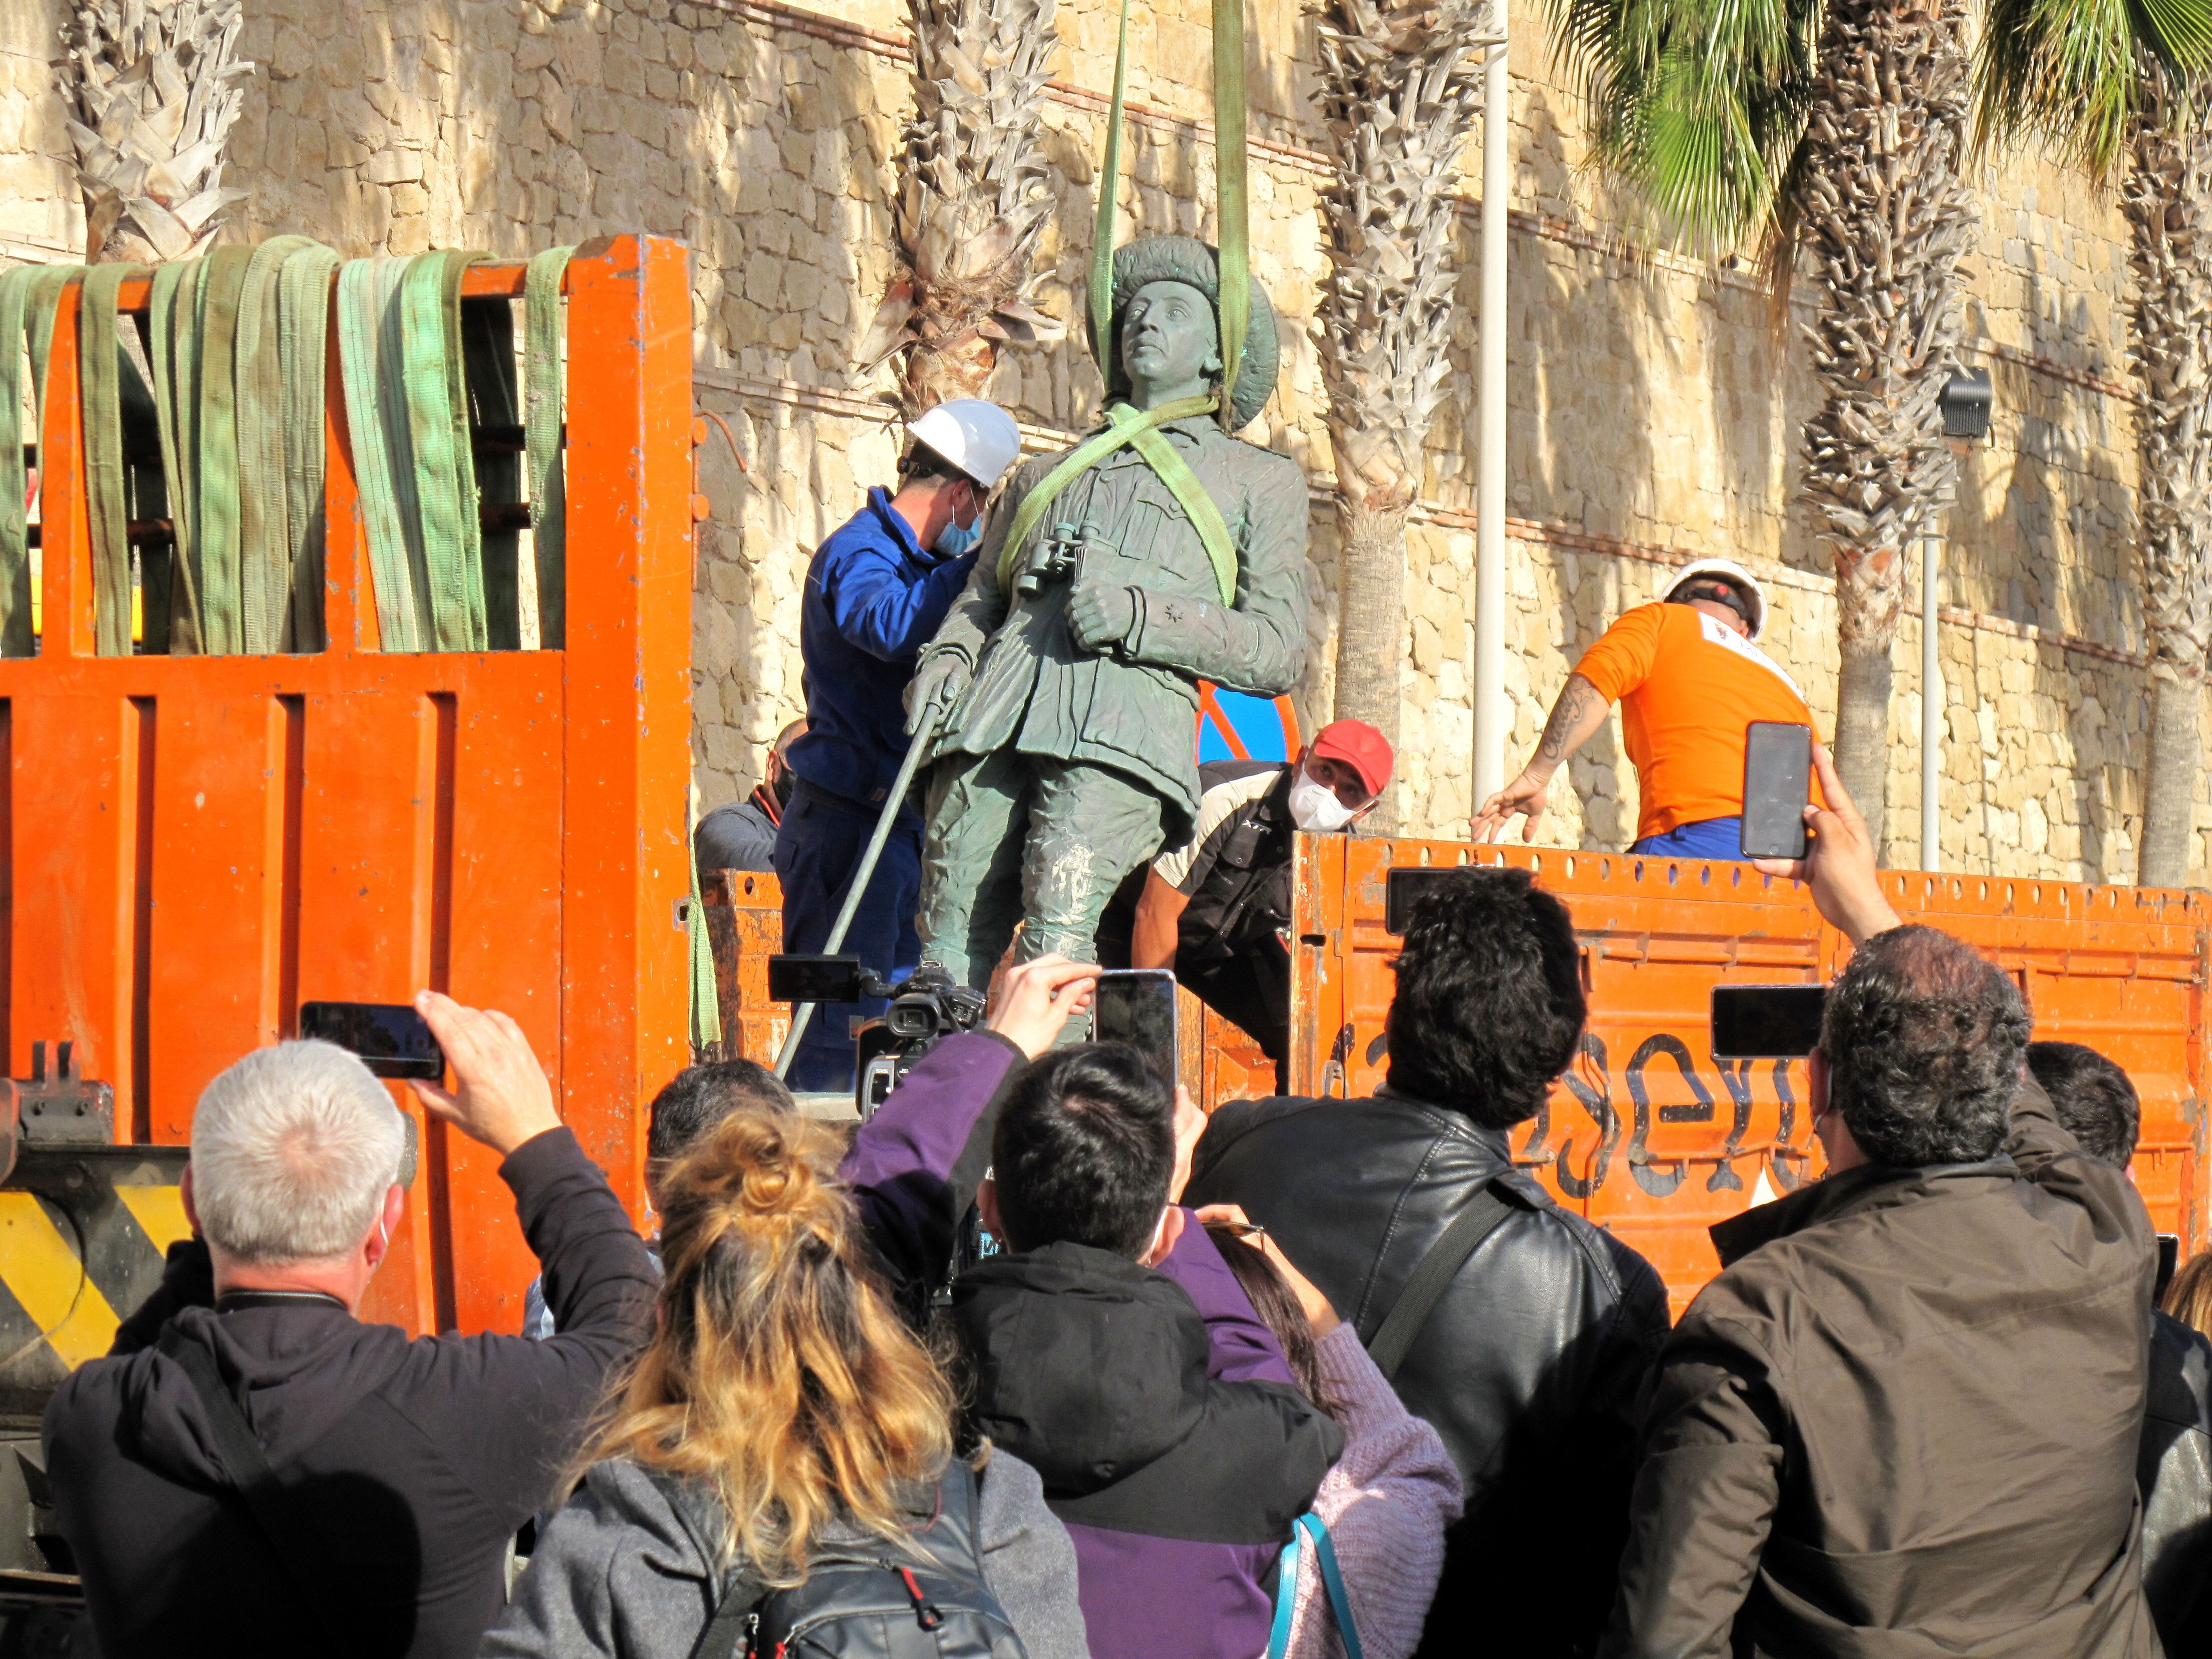 The last&nbsp;statue&nbsp;of former Spanish dictator Francisco&nbsp;Franco&nbsp;was removed on Tuesday from the city gates of